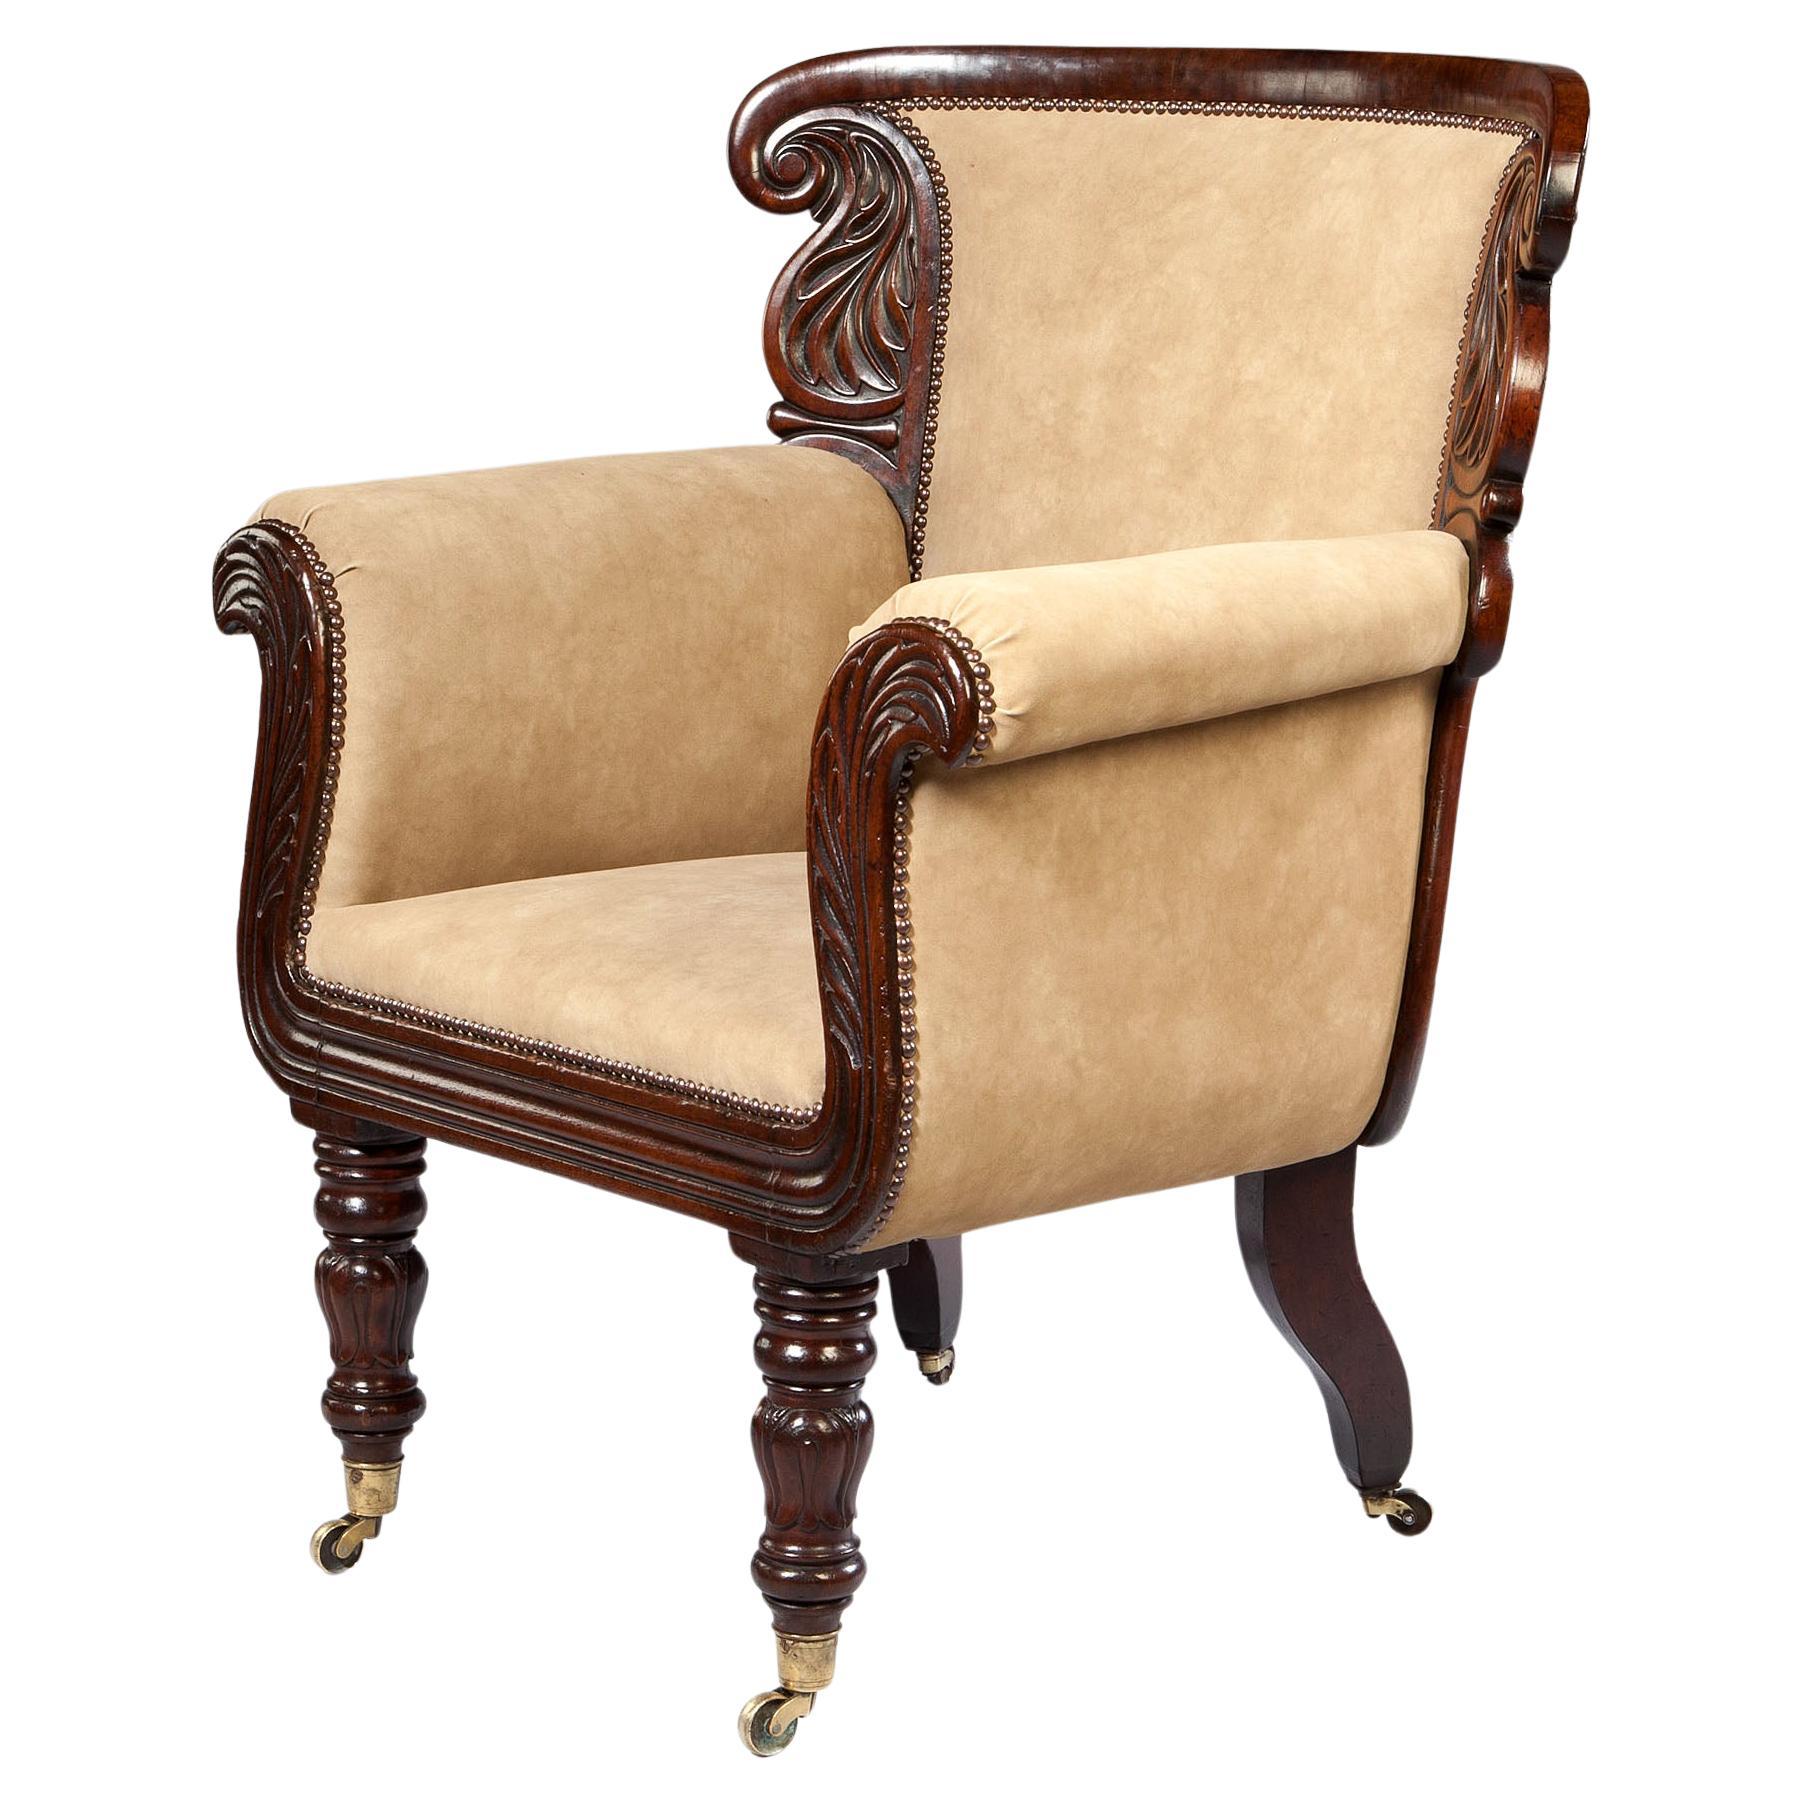 An Overscale William IV Library Armchair